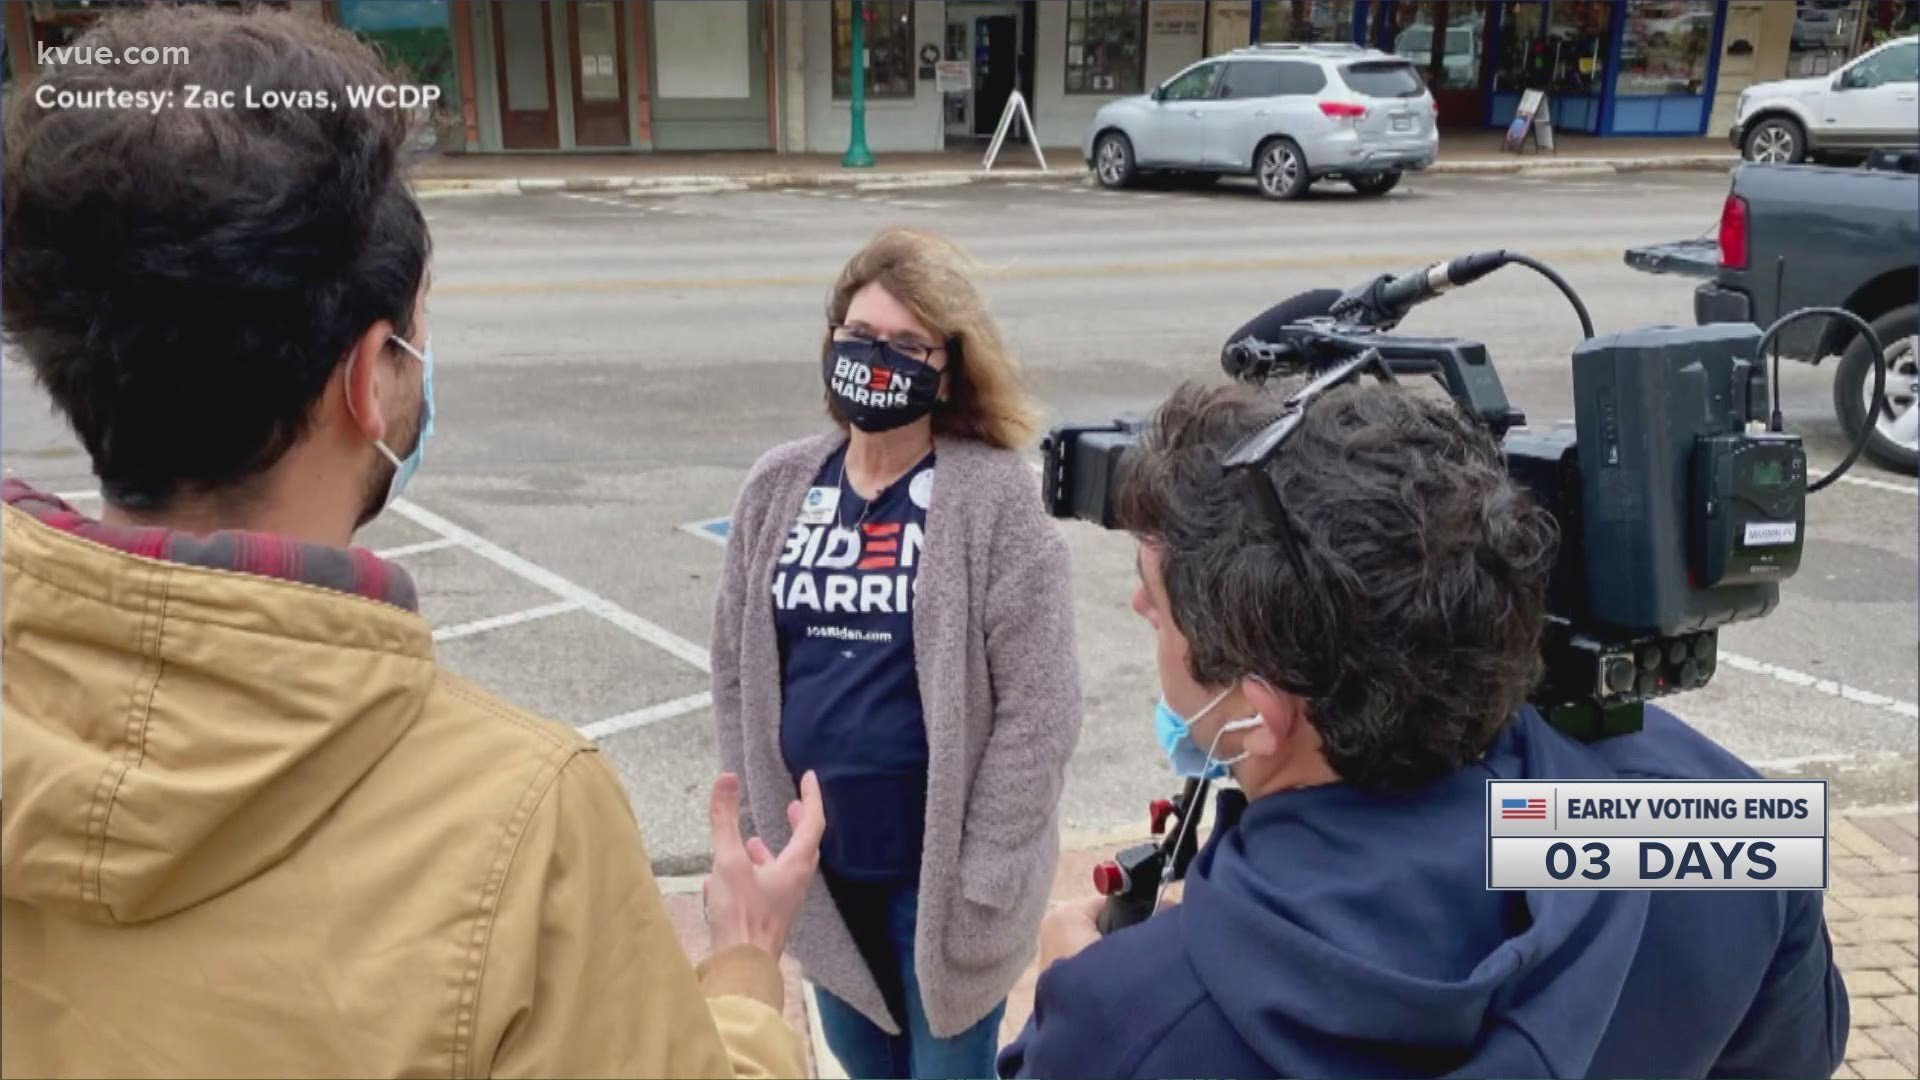 The high voter turnout in Williamson County is drawing international attention. A French TV crew visited the county on Monday.